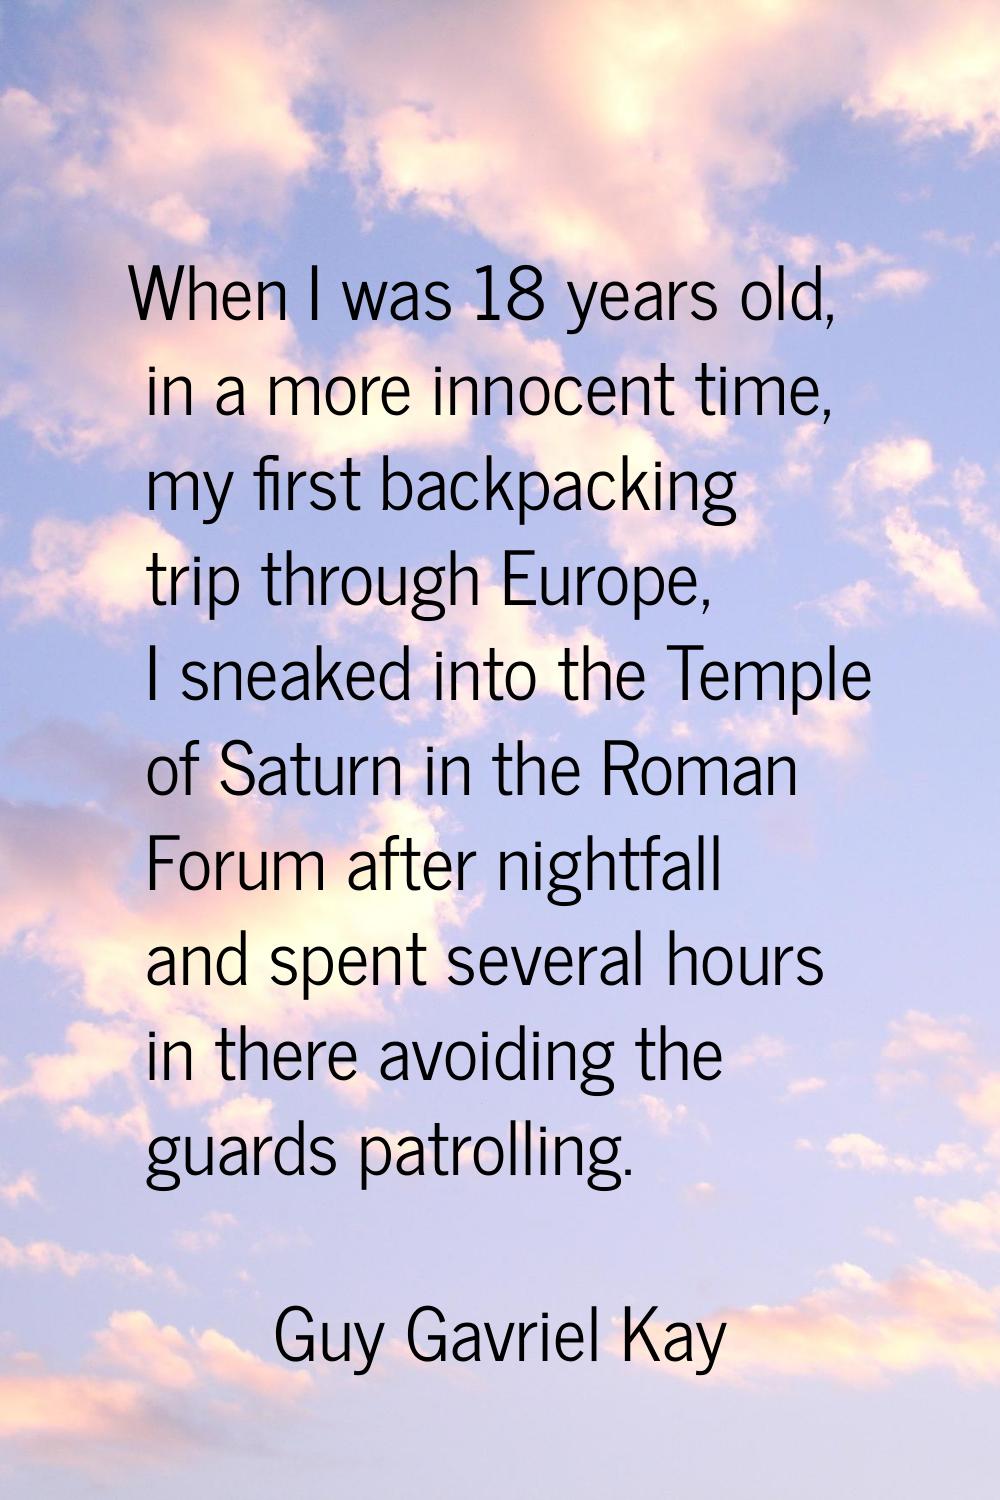 When I was 18 years old, in a more innocent time, my first backpacking trip through Europe, I sneak